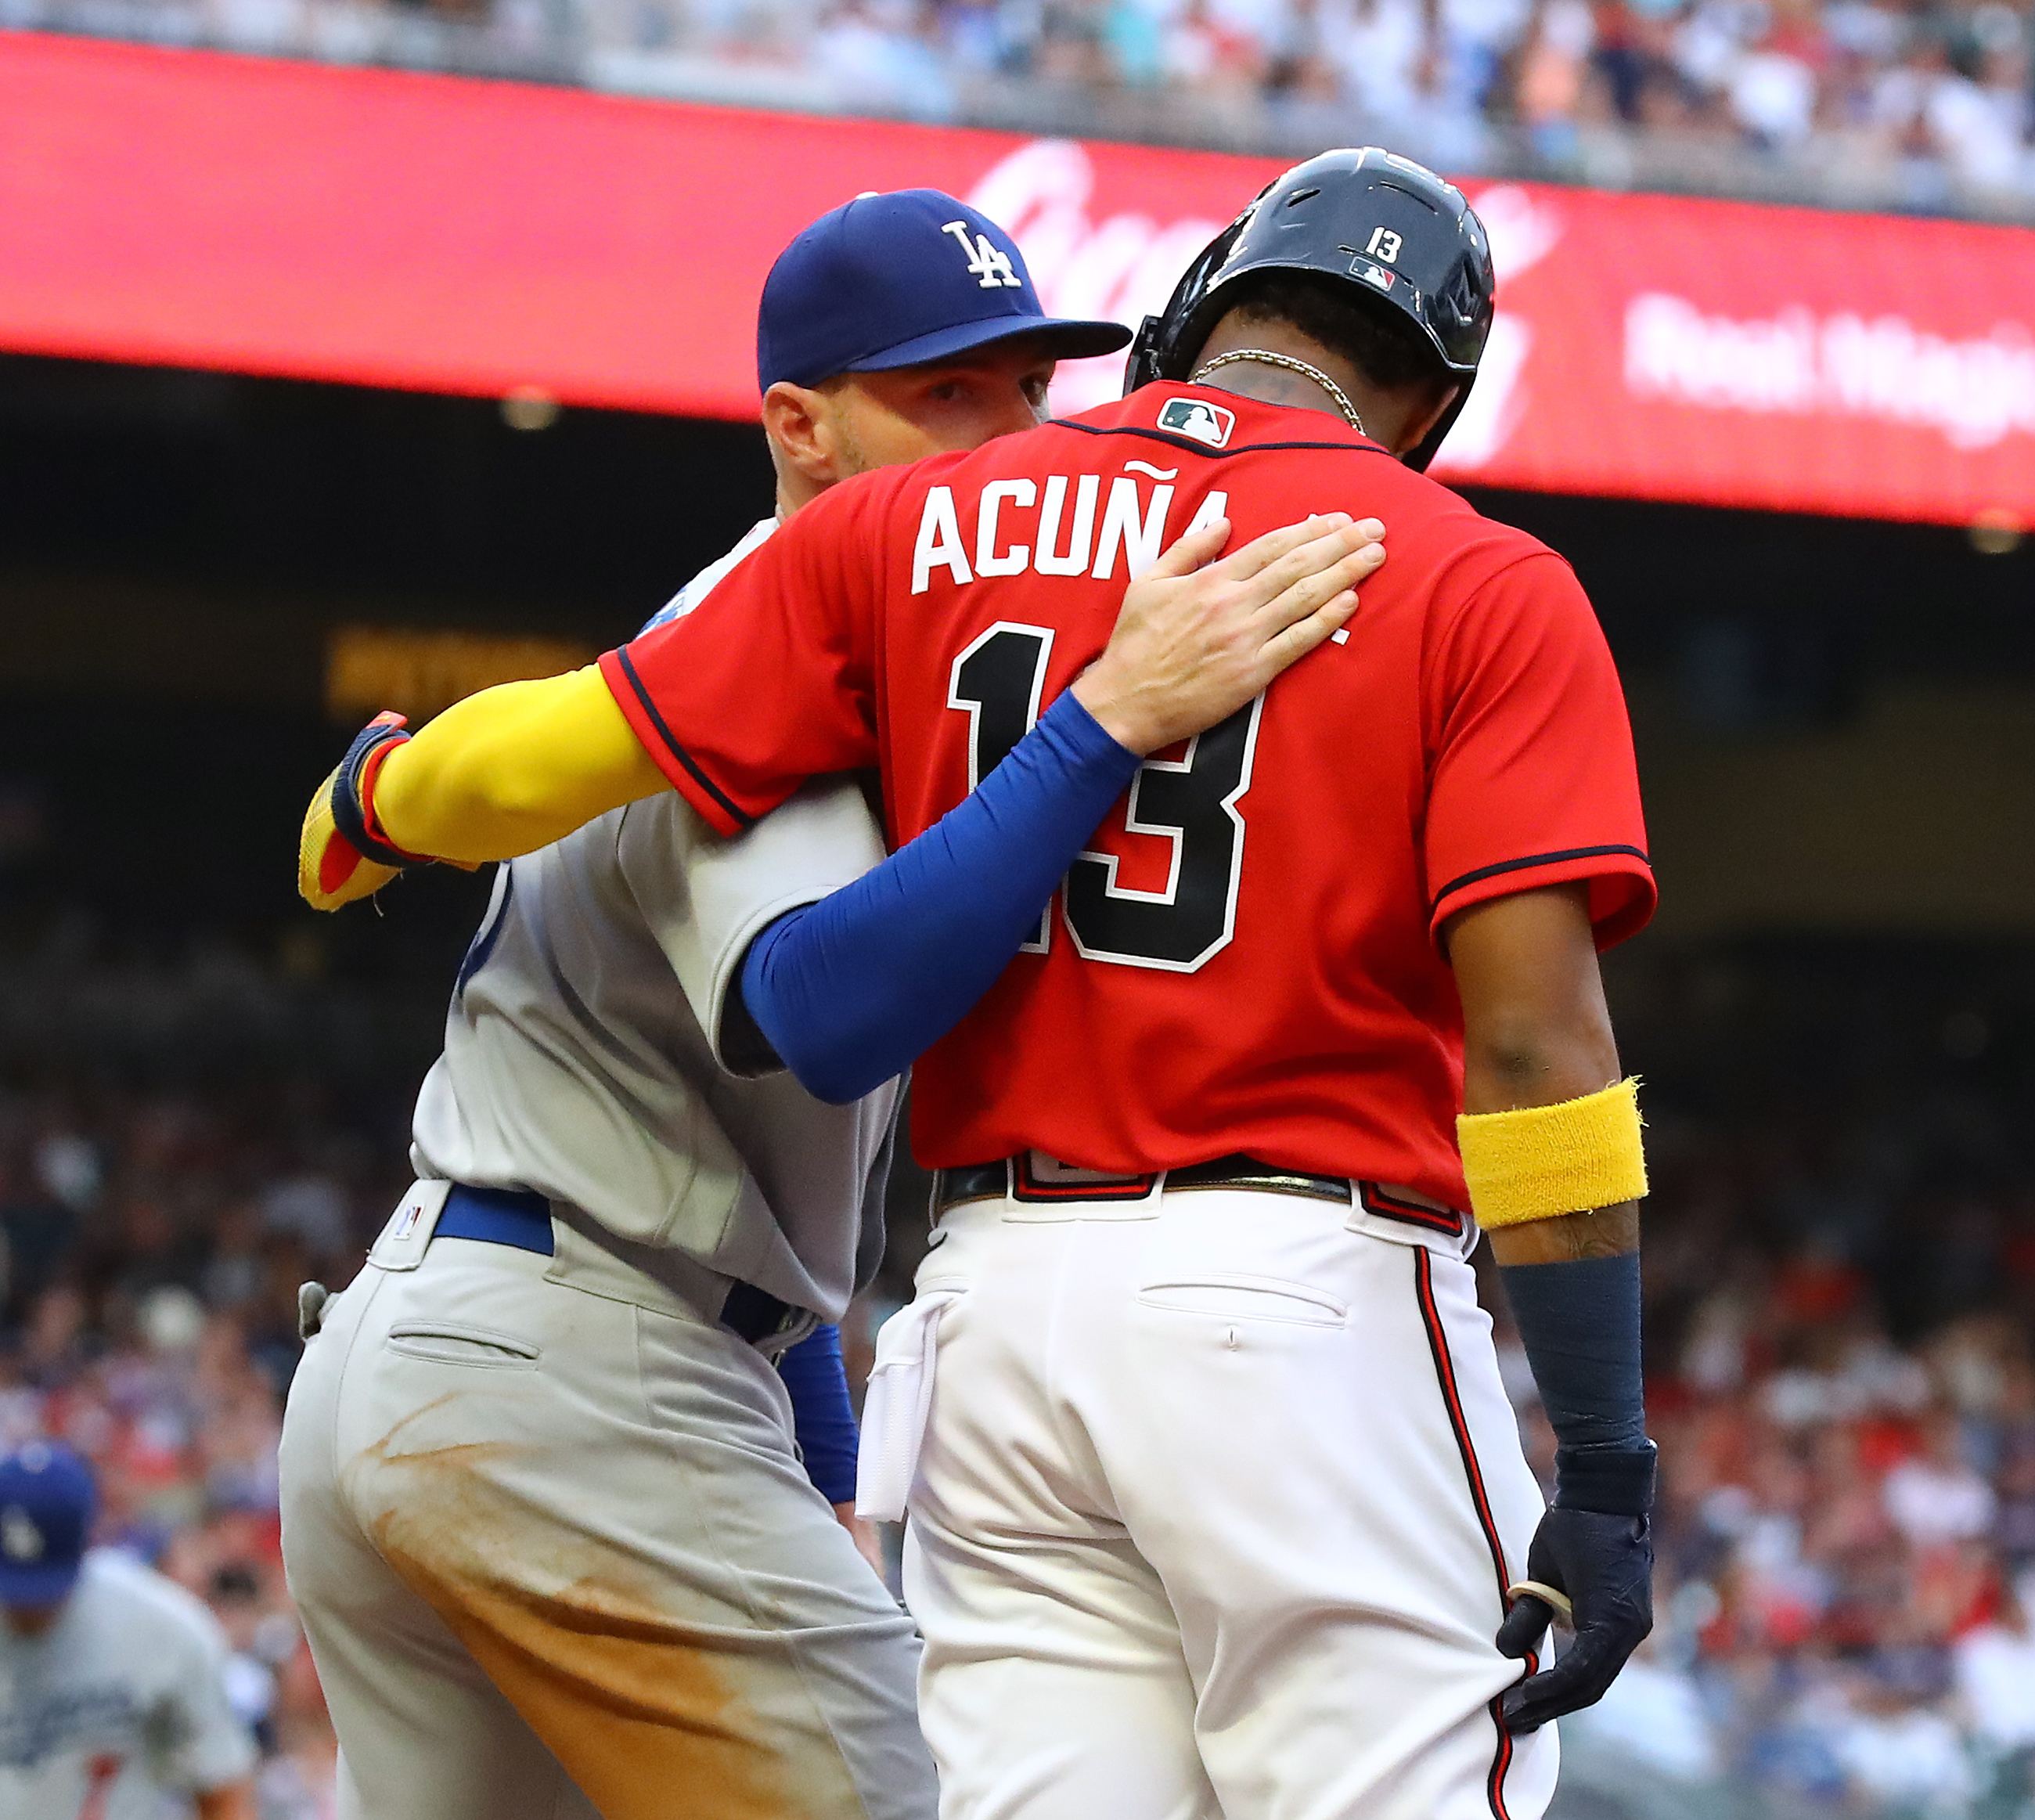 Braves outfielder Ronald Acuna gets a hug from Los Angles Dodgers first baseman Freddie Freeman after drawing a walk during the first inning in a MLB baseball game on Friday, June 24, 2022, in Atlanta.   “Curtis Compton / Curtis.Compton@ajc.com”